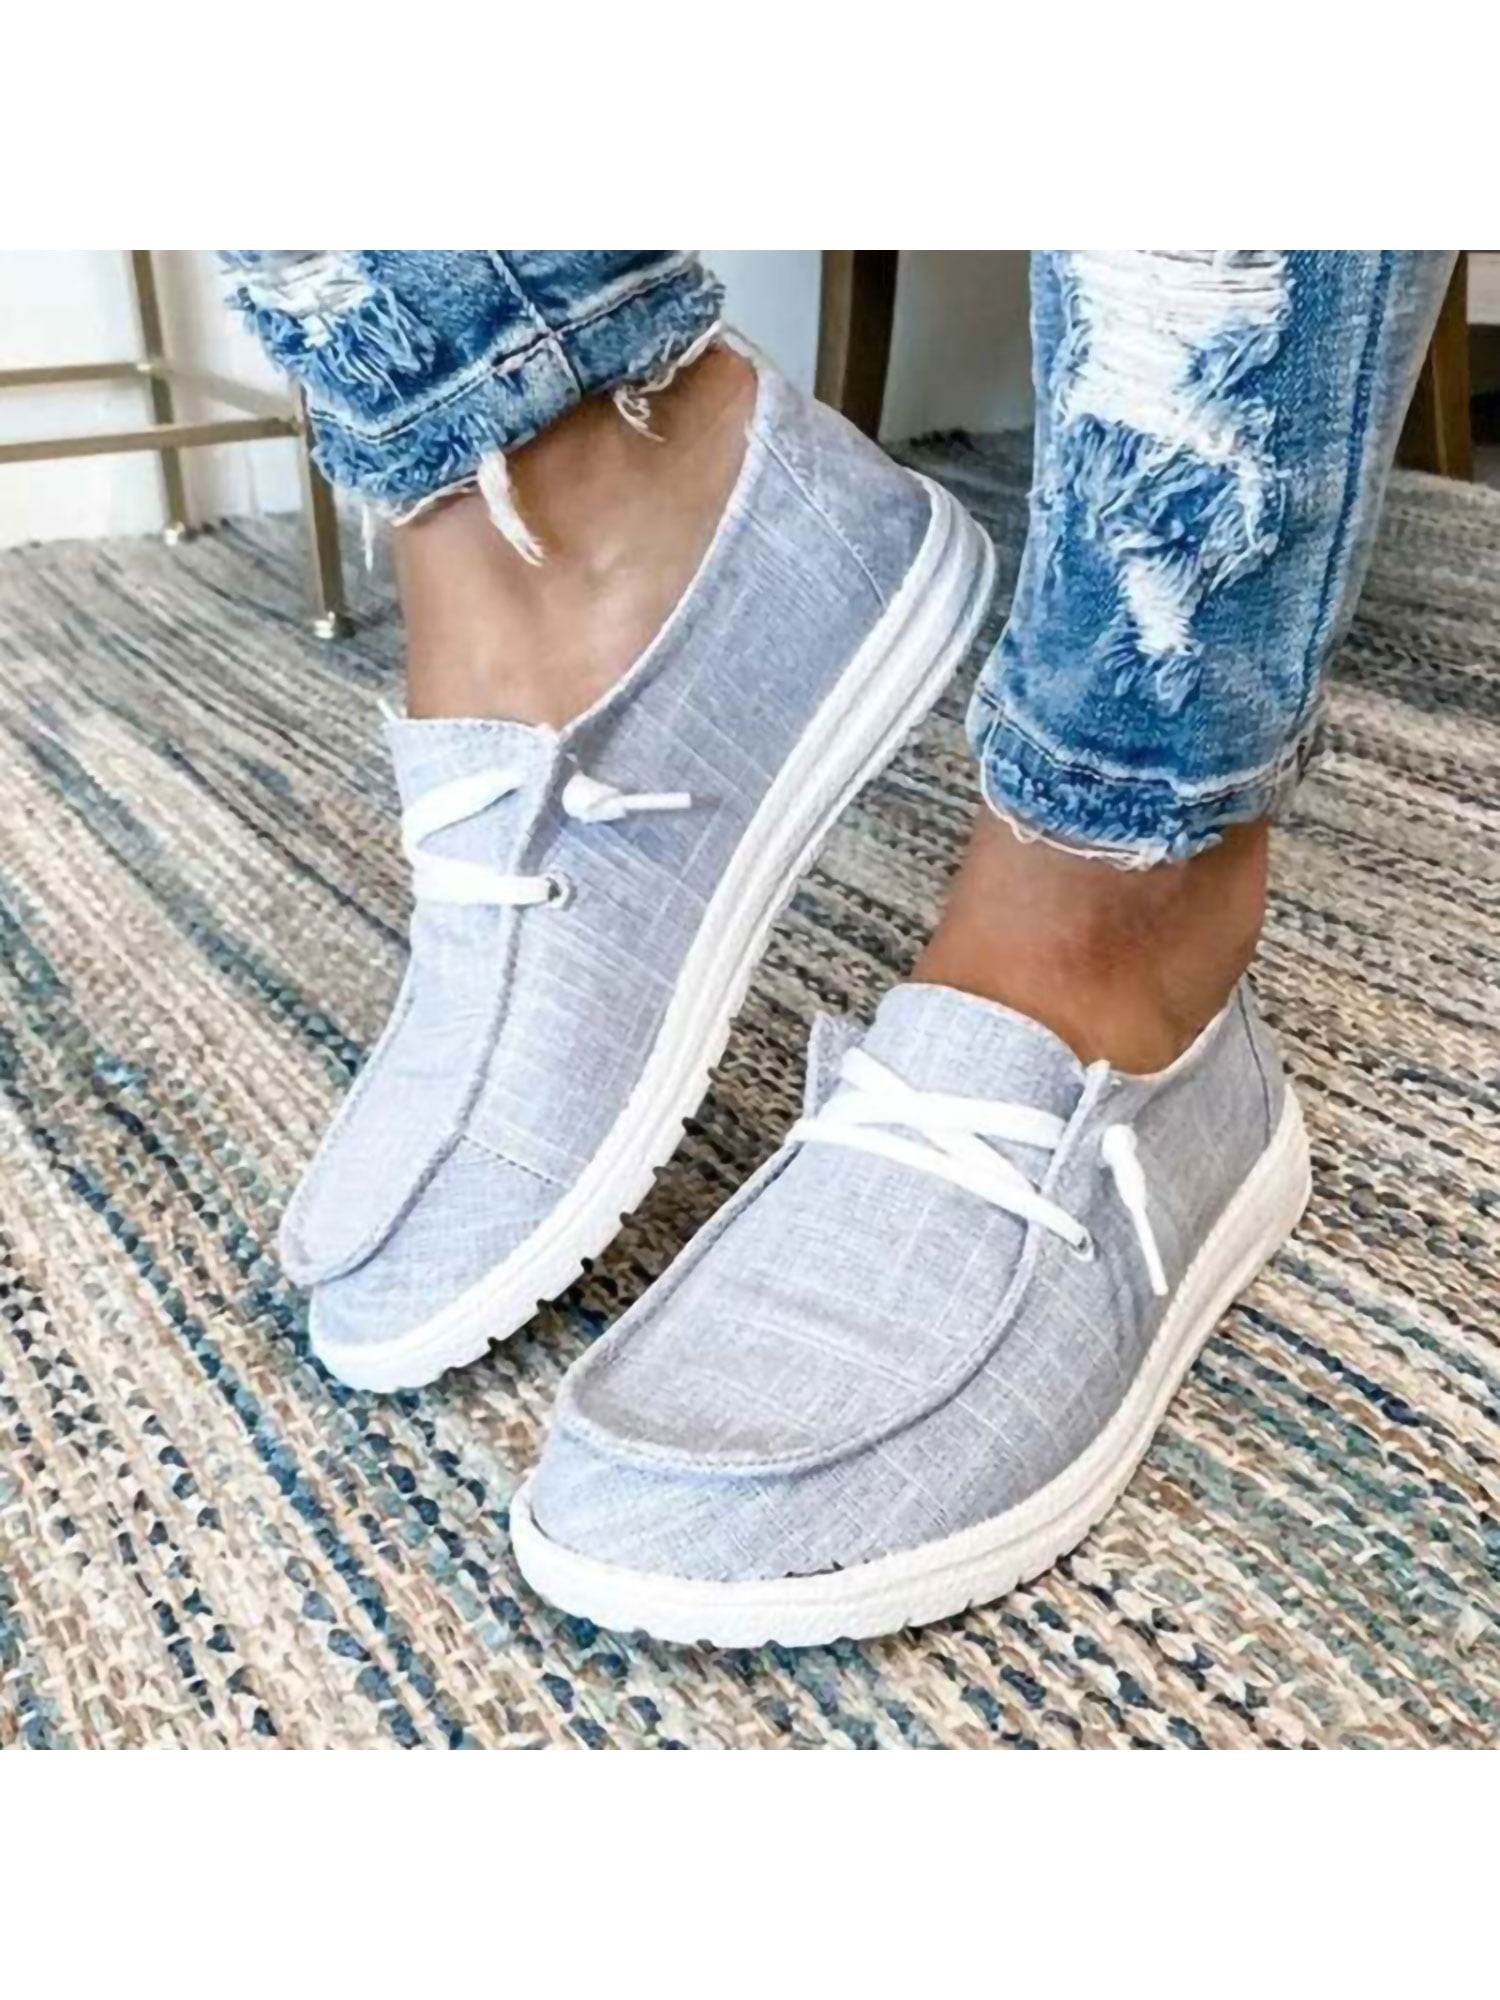 Women Ladies Loafer Casual Sneakers Summer Shoes Flat Sneakers Low Shoes 